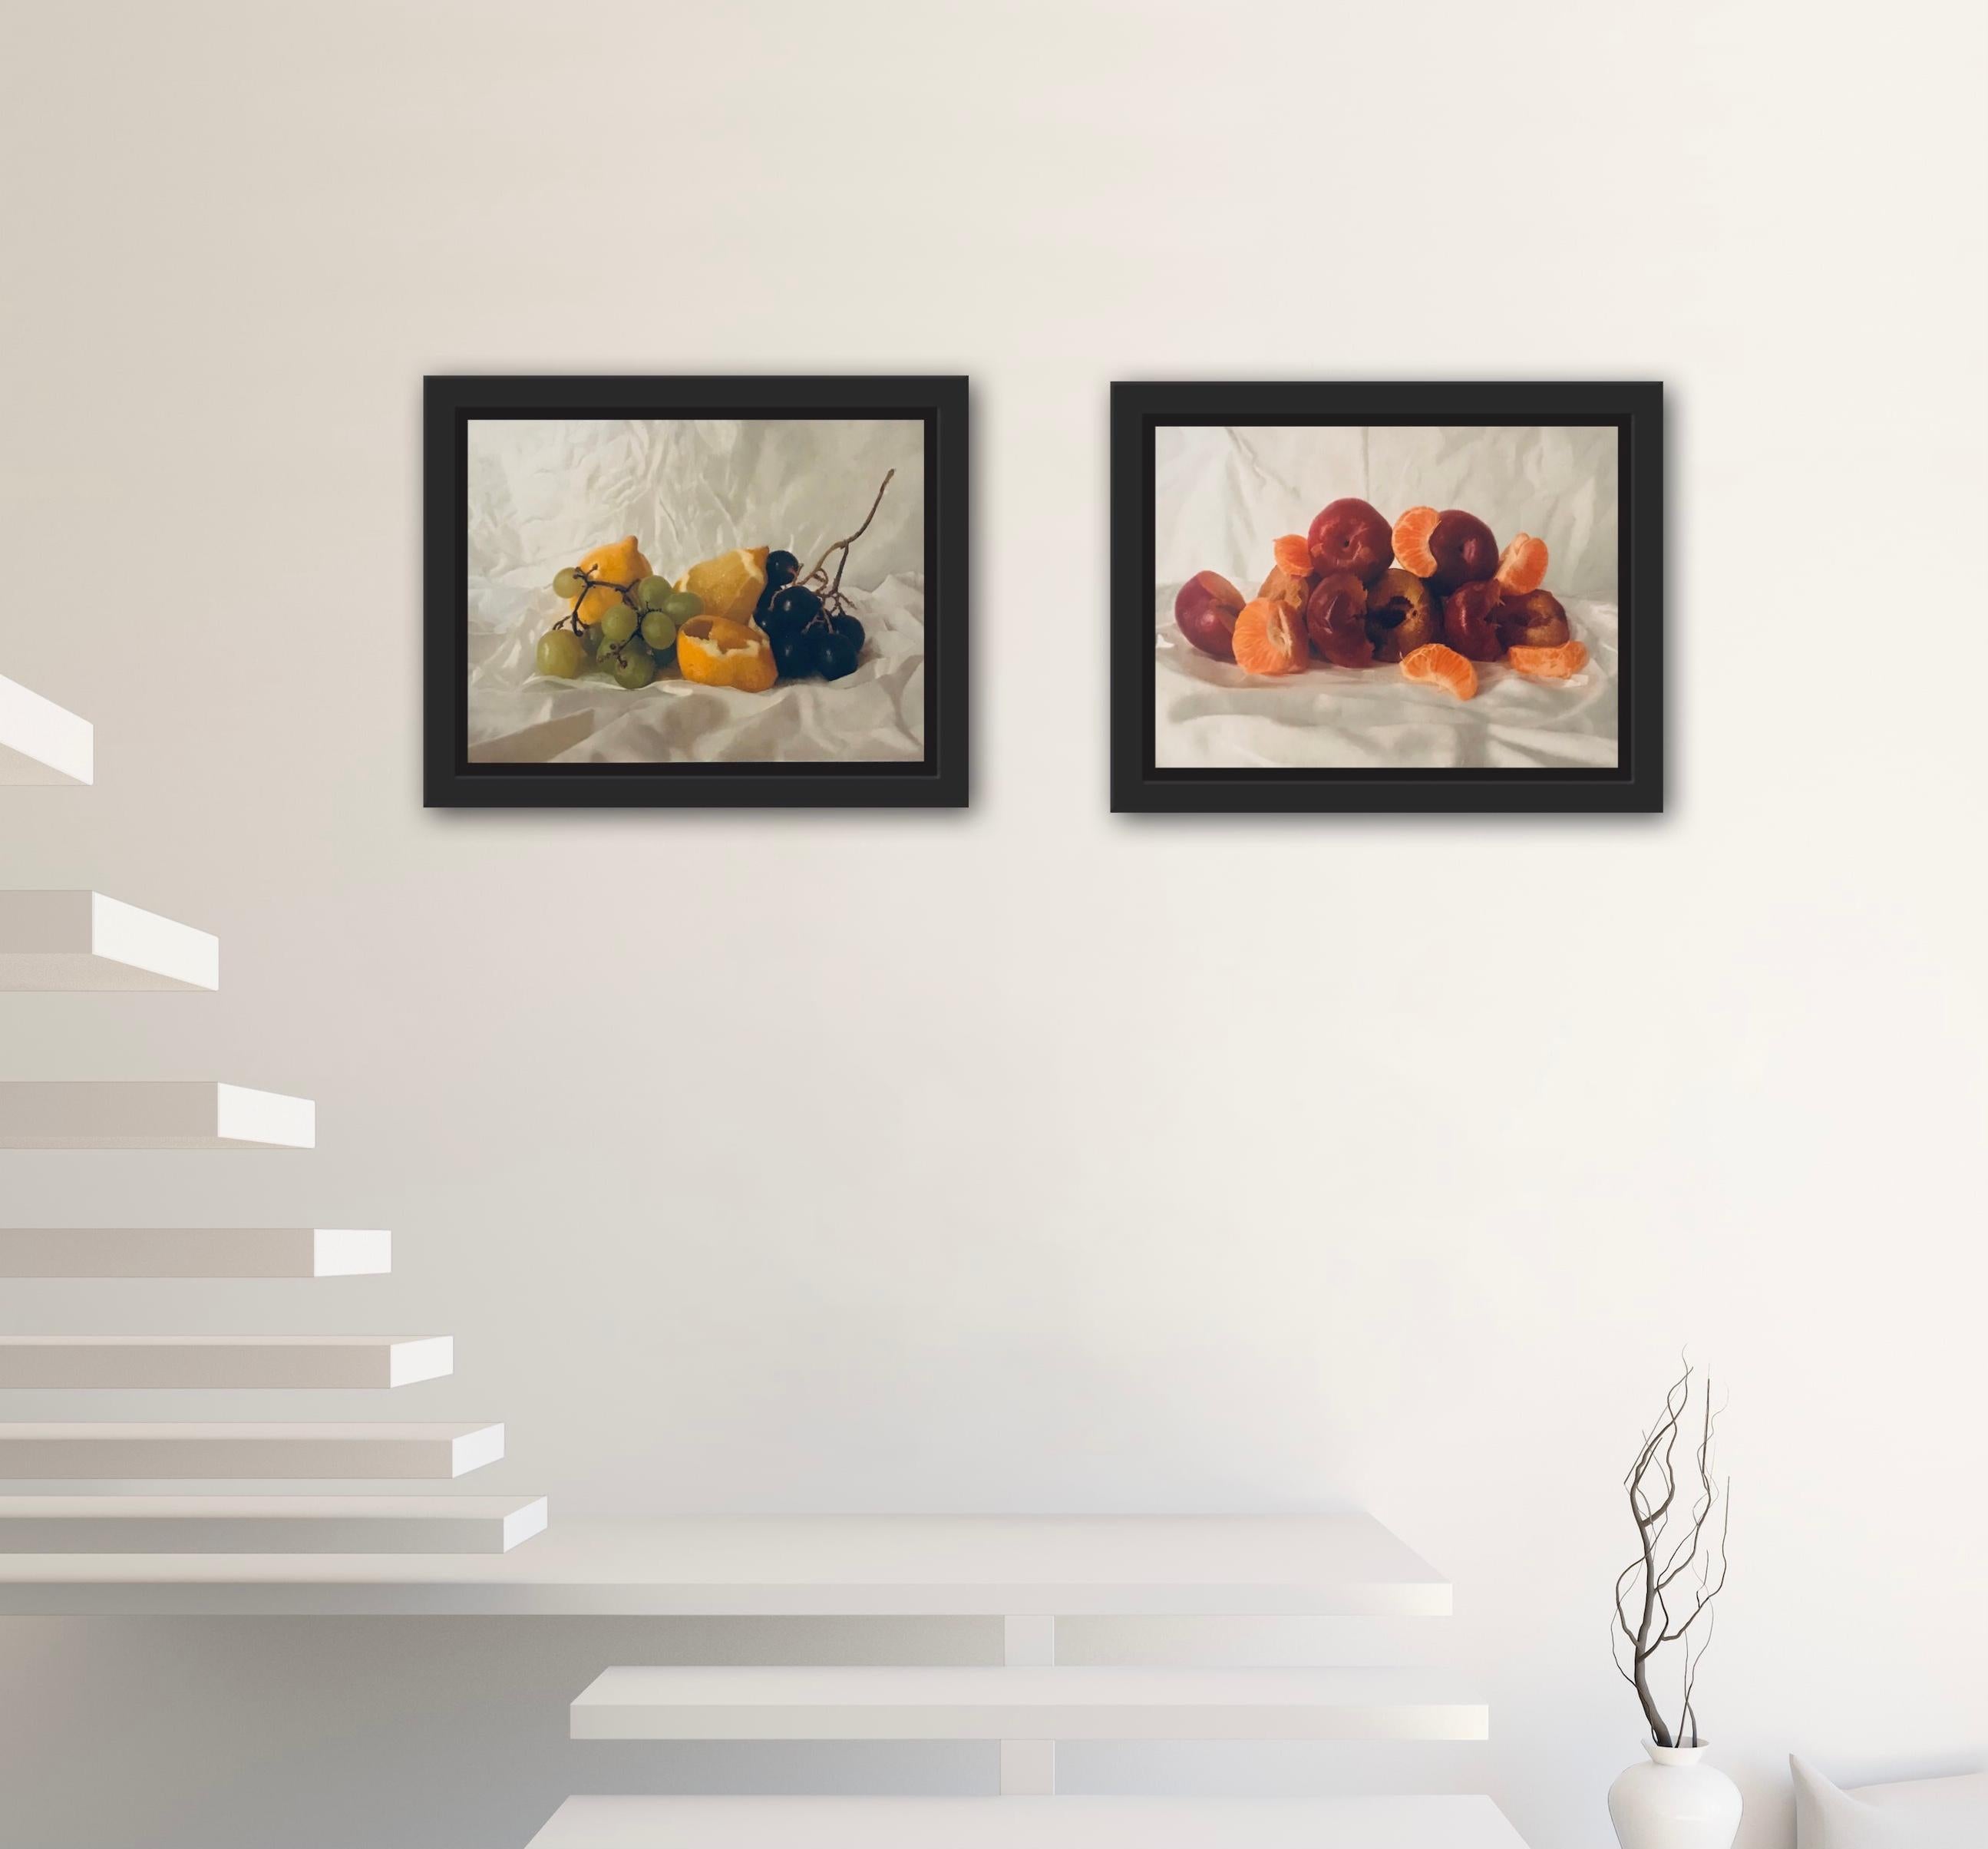 Cherries and Satsuma and Grapes and Lemon diptych - Realist Painting by Kate Verrion